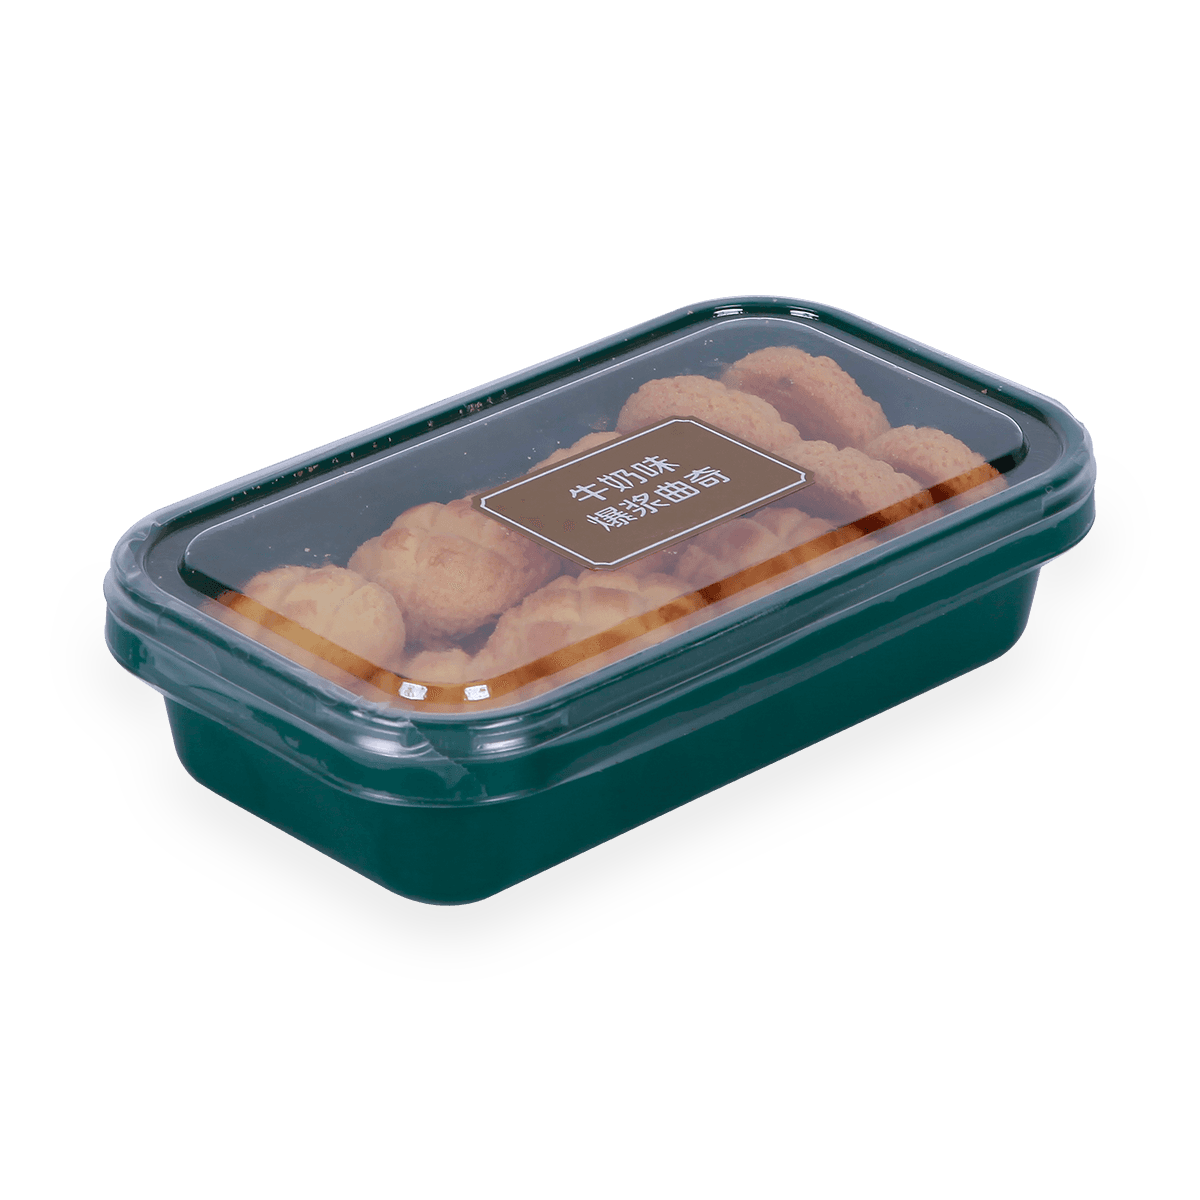 PCR PET recyclable clamshell food packaging containers 